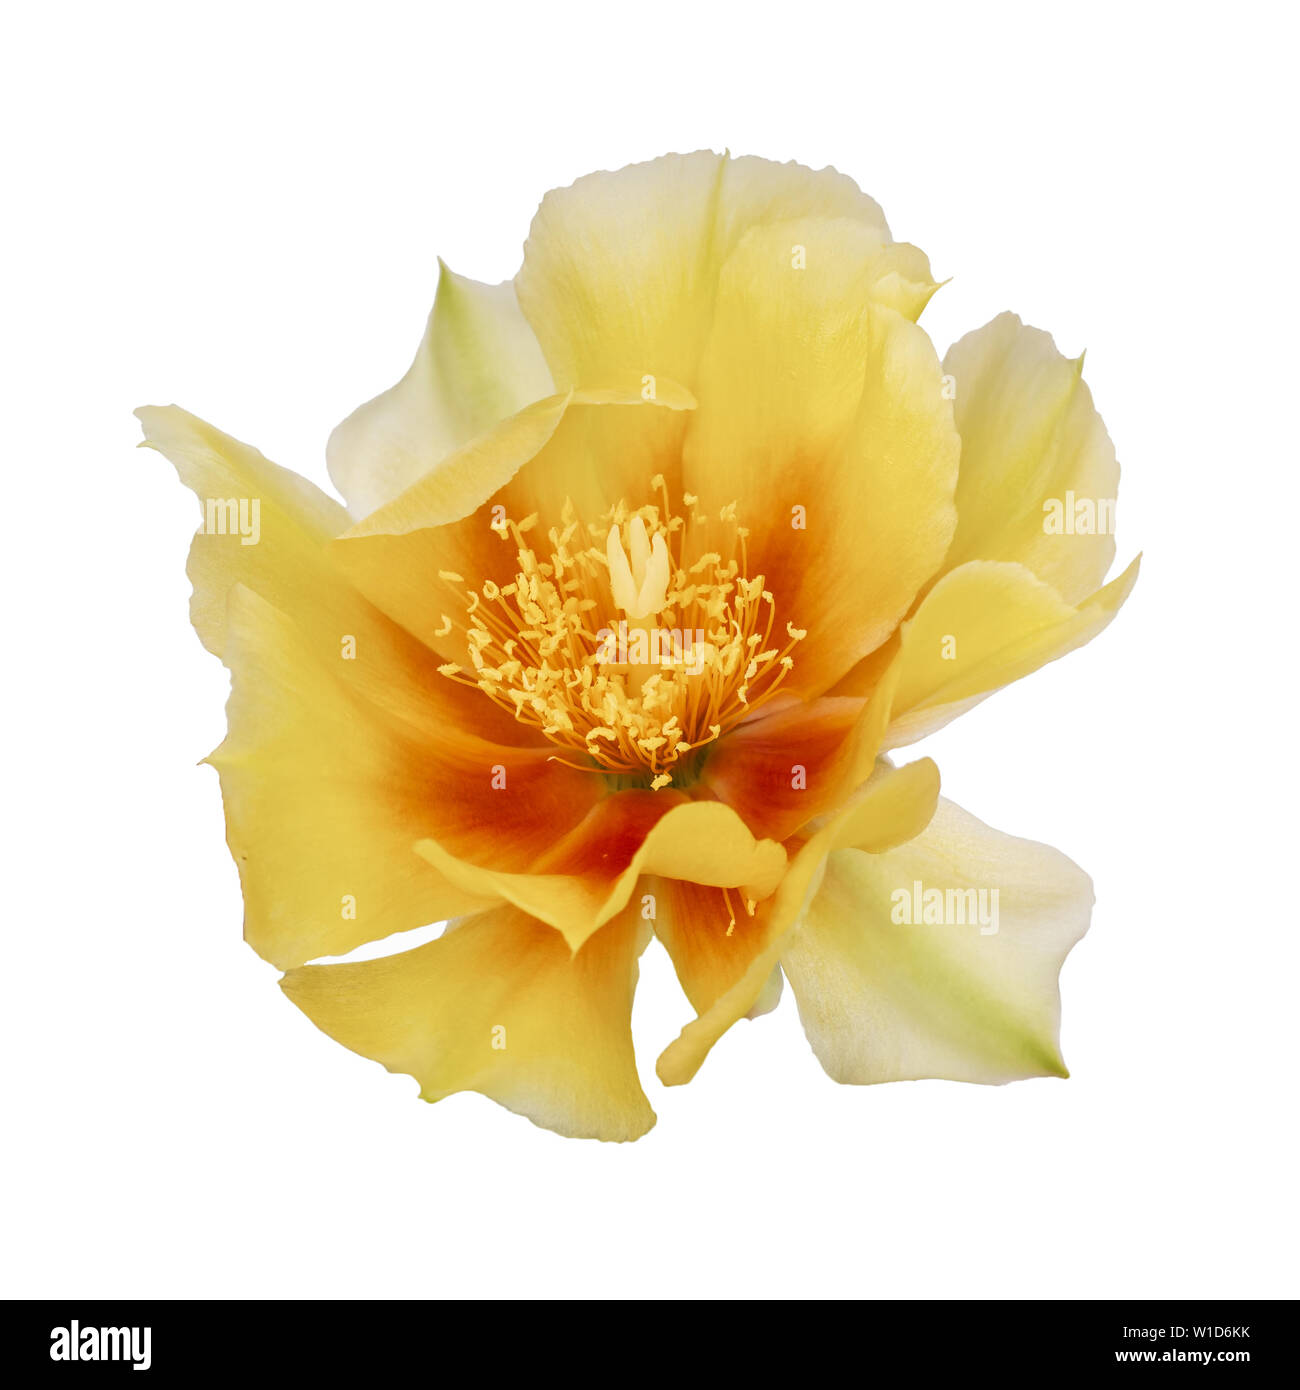 Cactus flower, Indian fig. Isolated on white. Opuntia ficus indica. Stock Photo